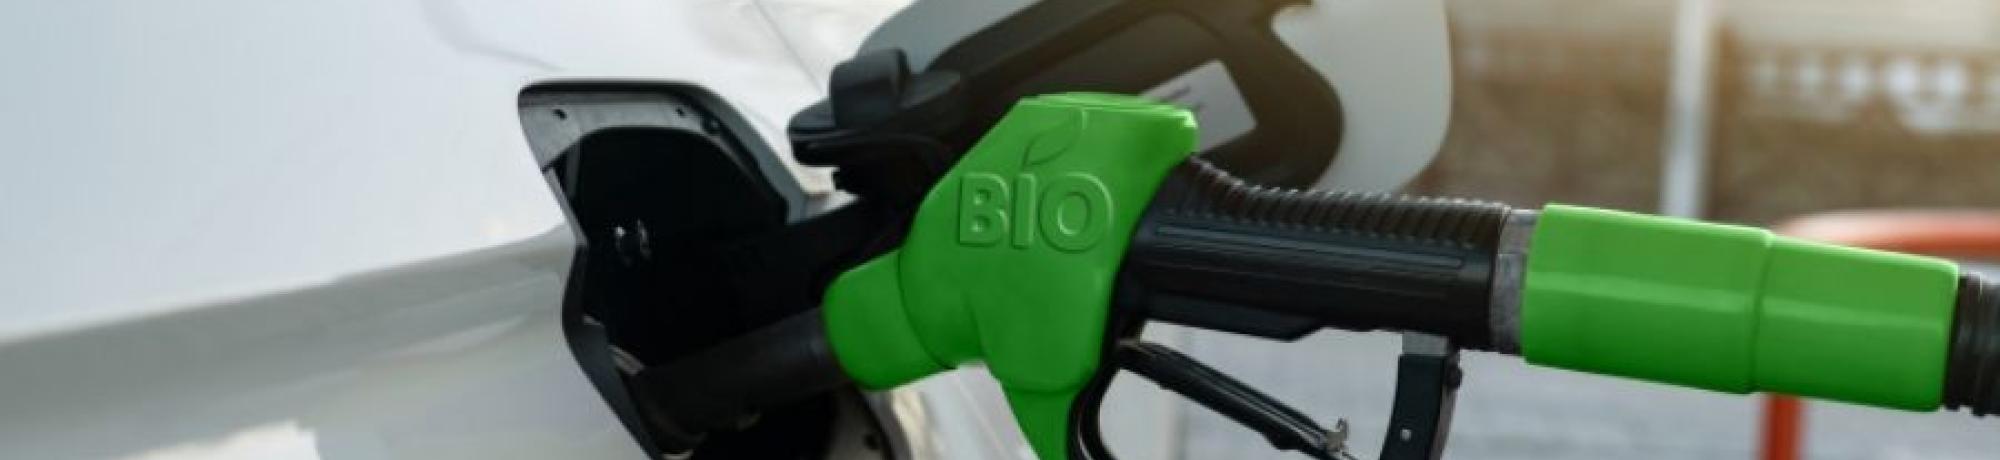 Car refueling with green gasoline handle